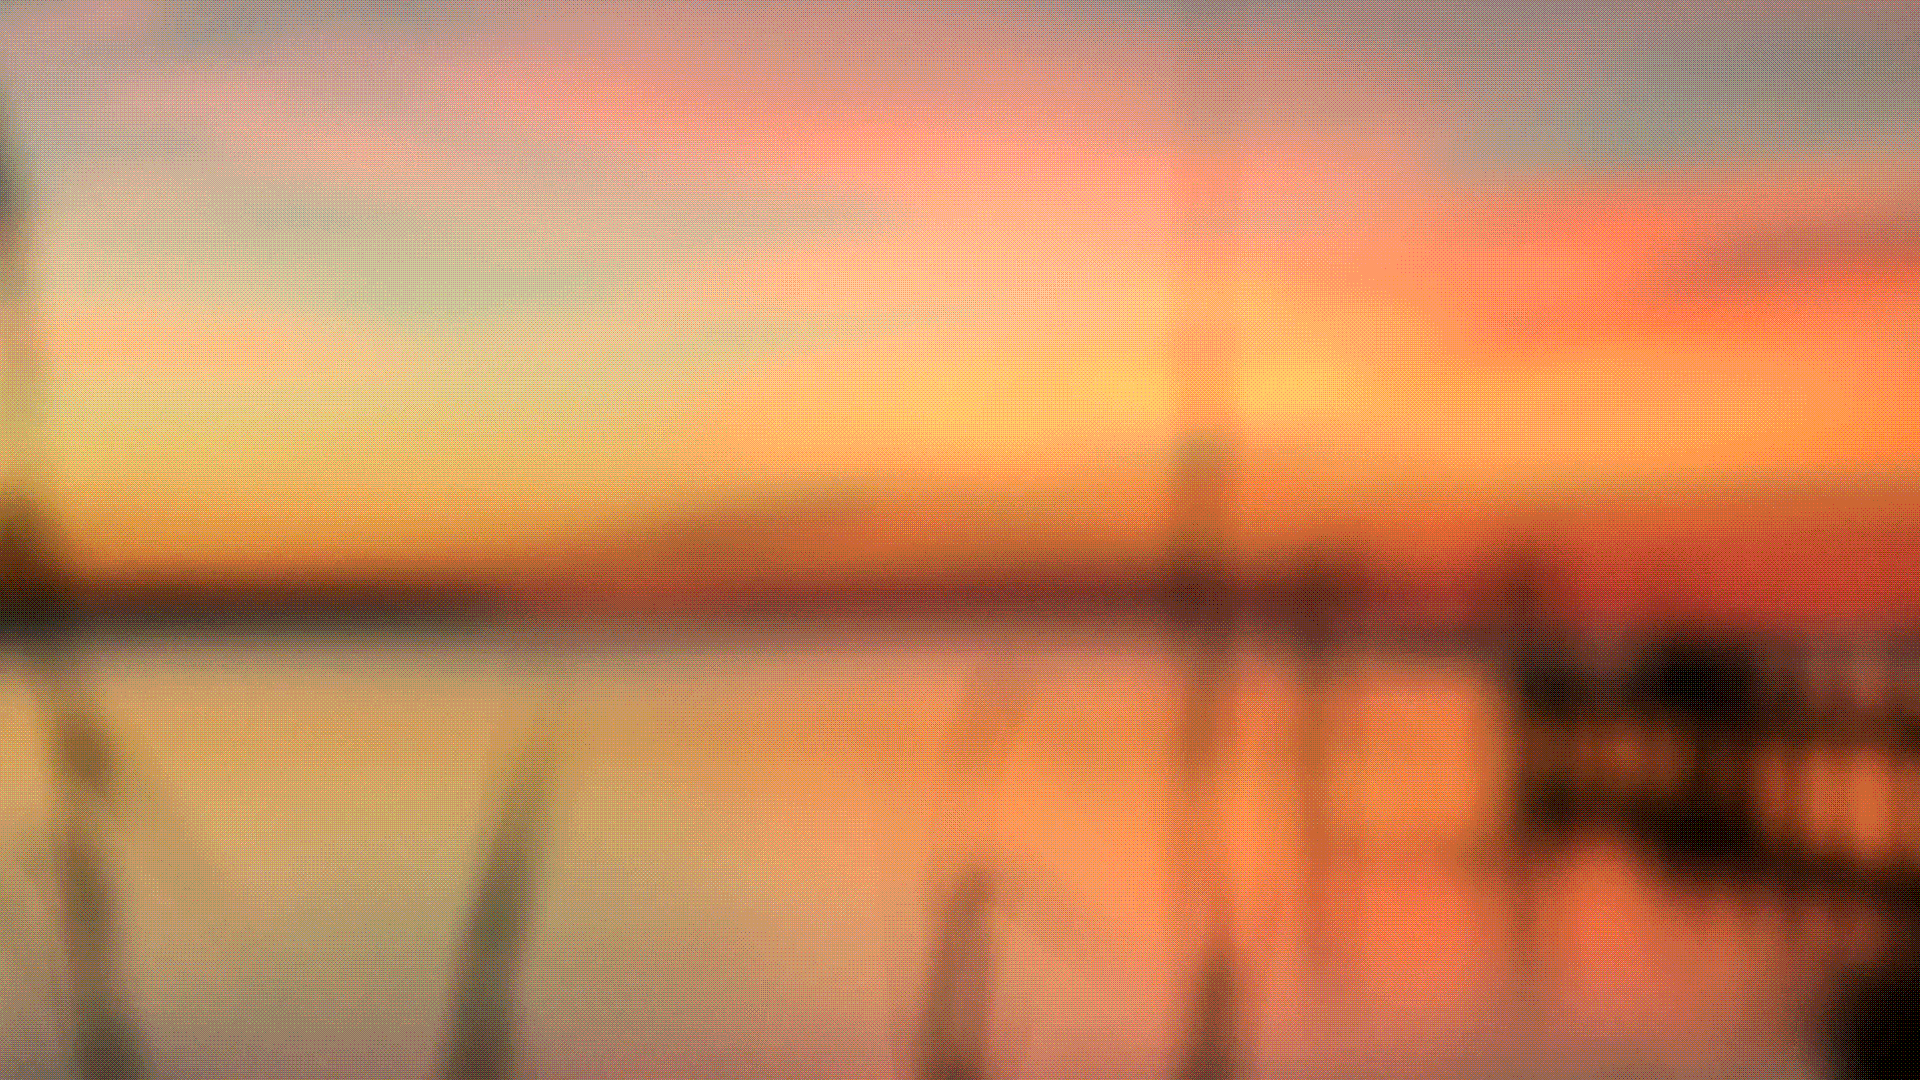 a blurred image of a brilliant sunset over a still sound, there's reeds in the foreground, a pier in the background, both in silhouette